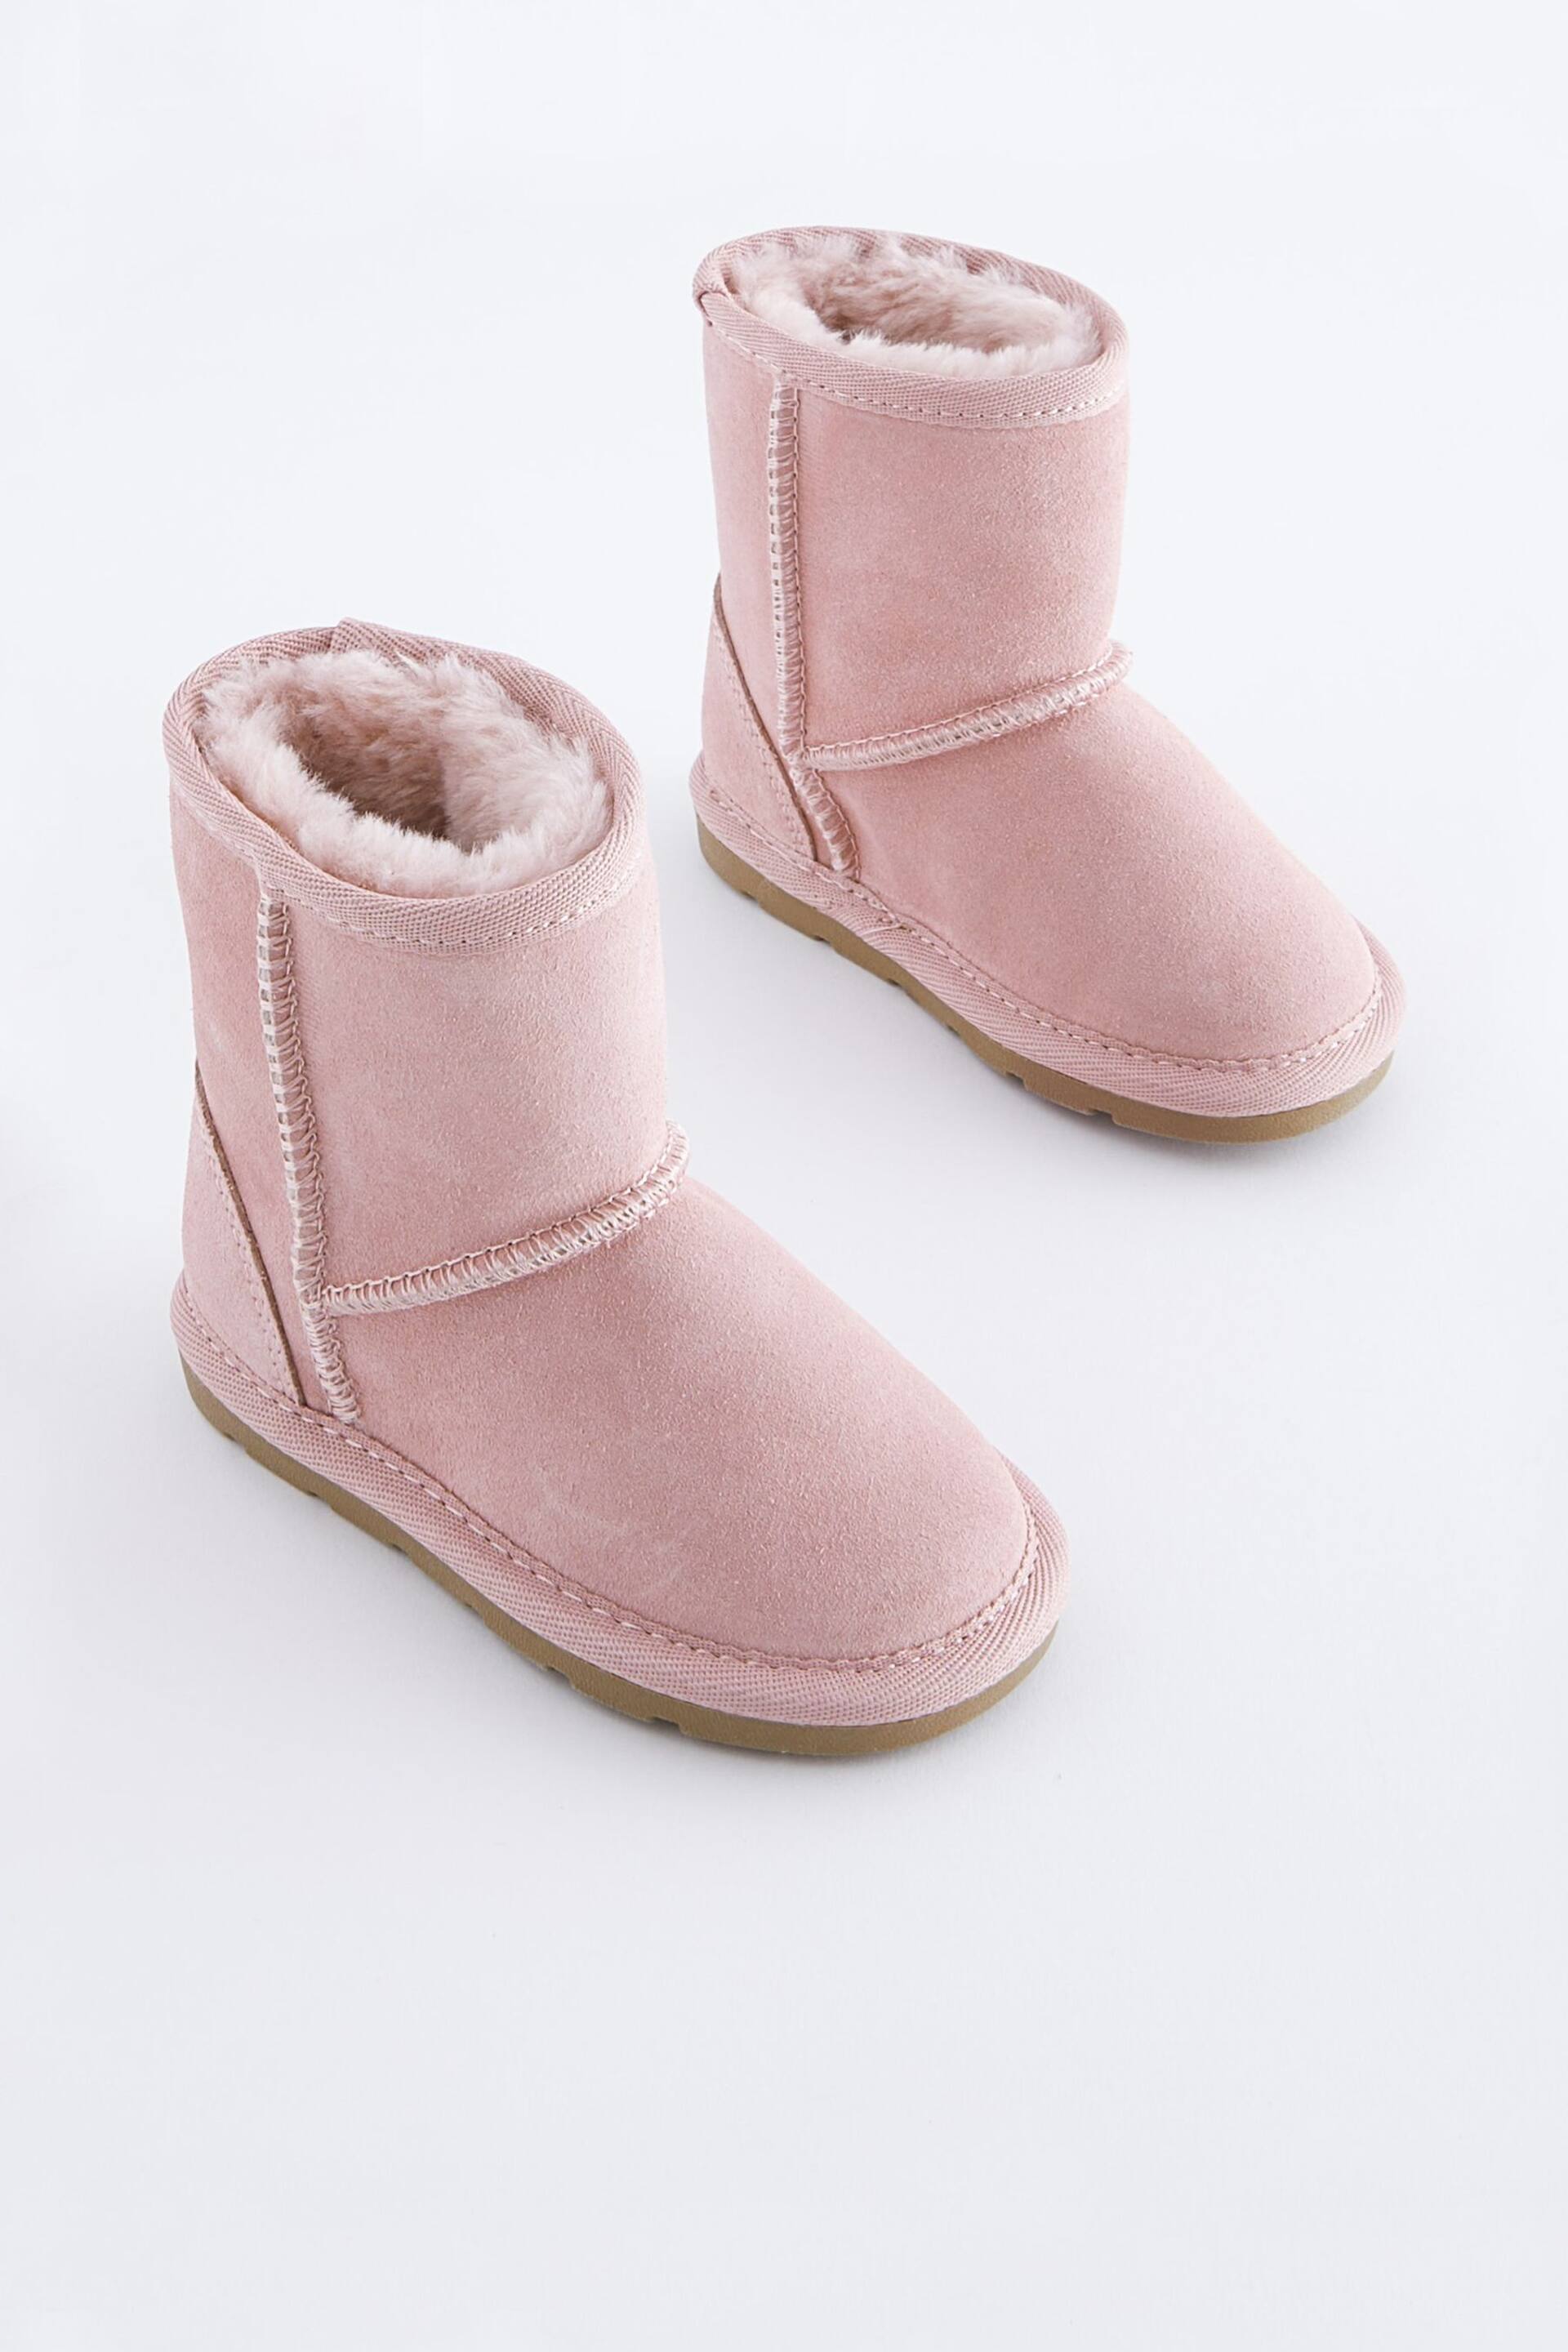 Pink Suede Tall Faux Fur Lined Water Repellent Pull-On Suede Boots - Image 1 of 7